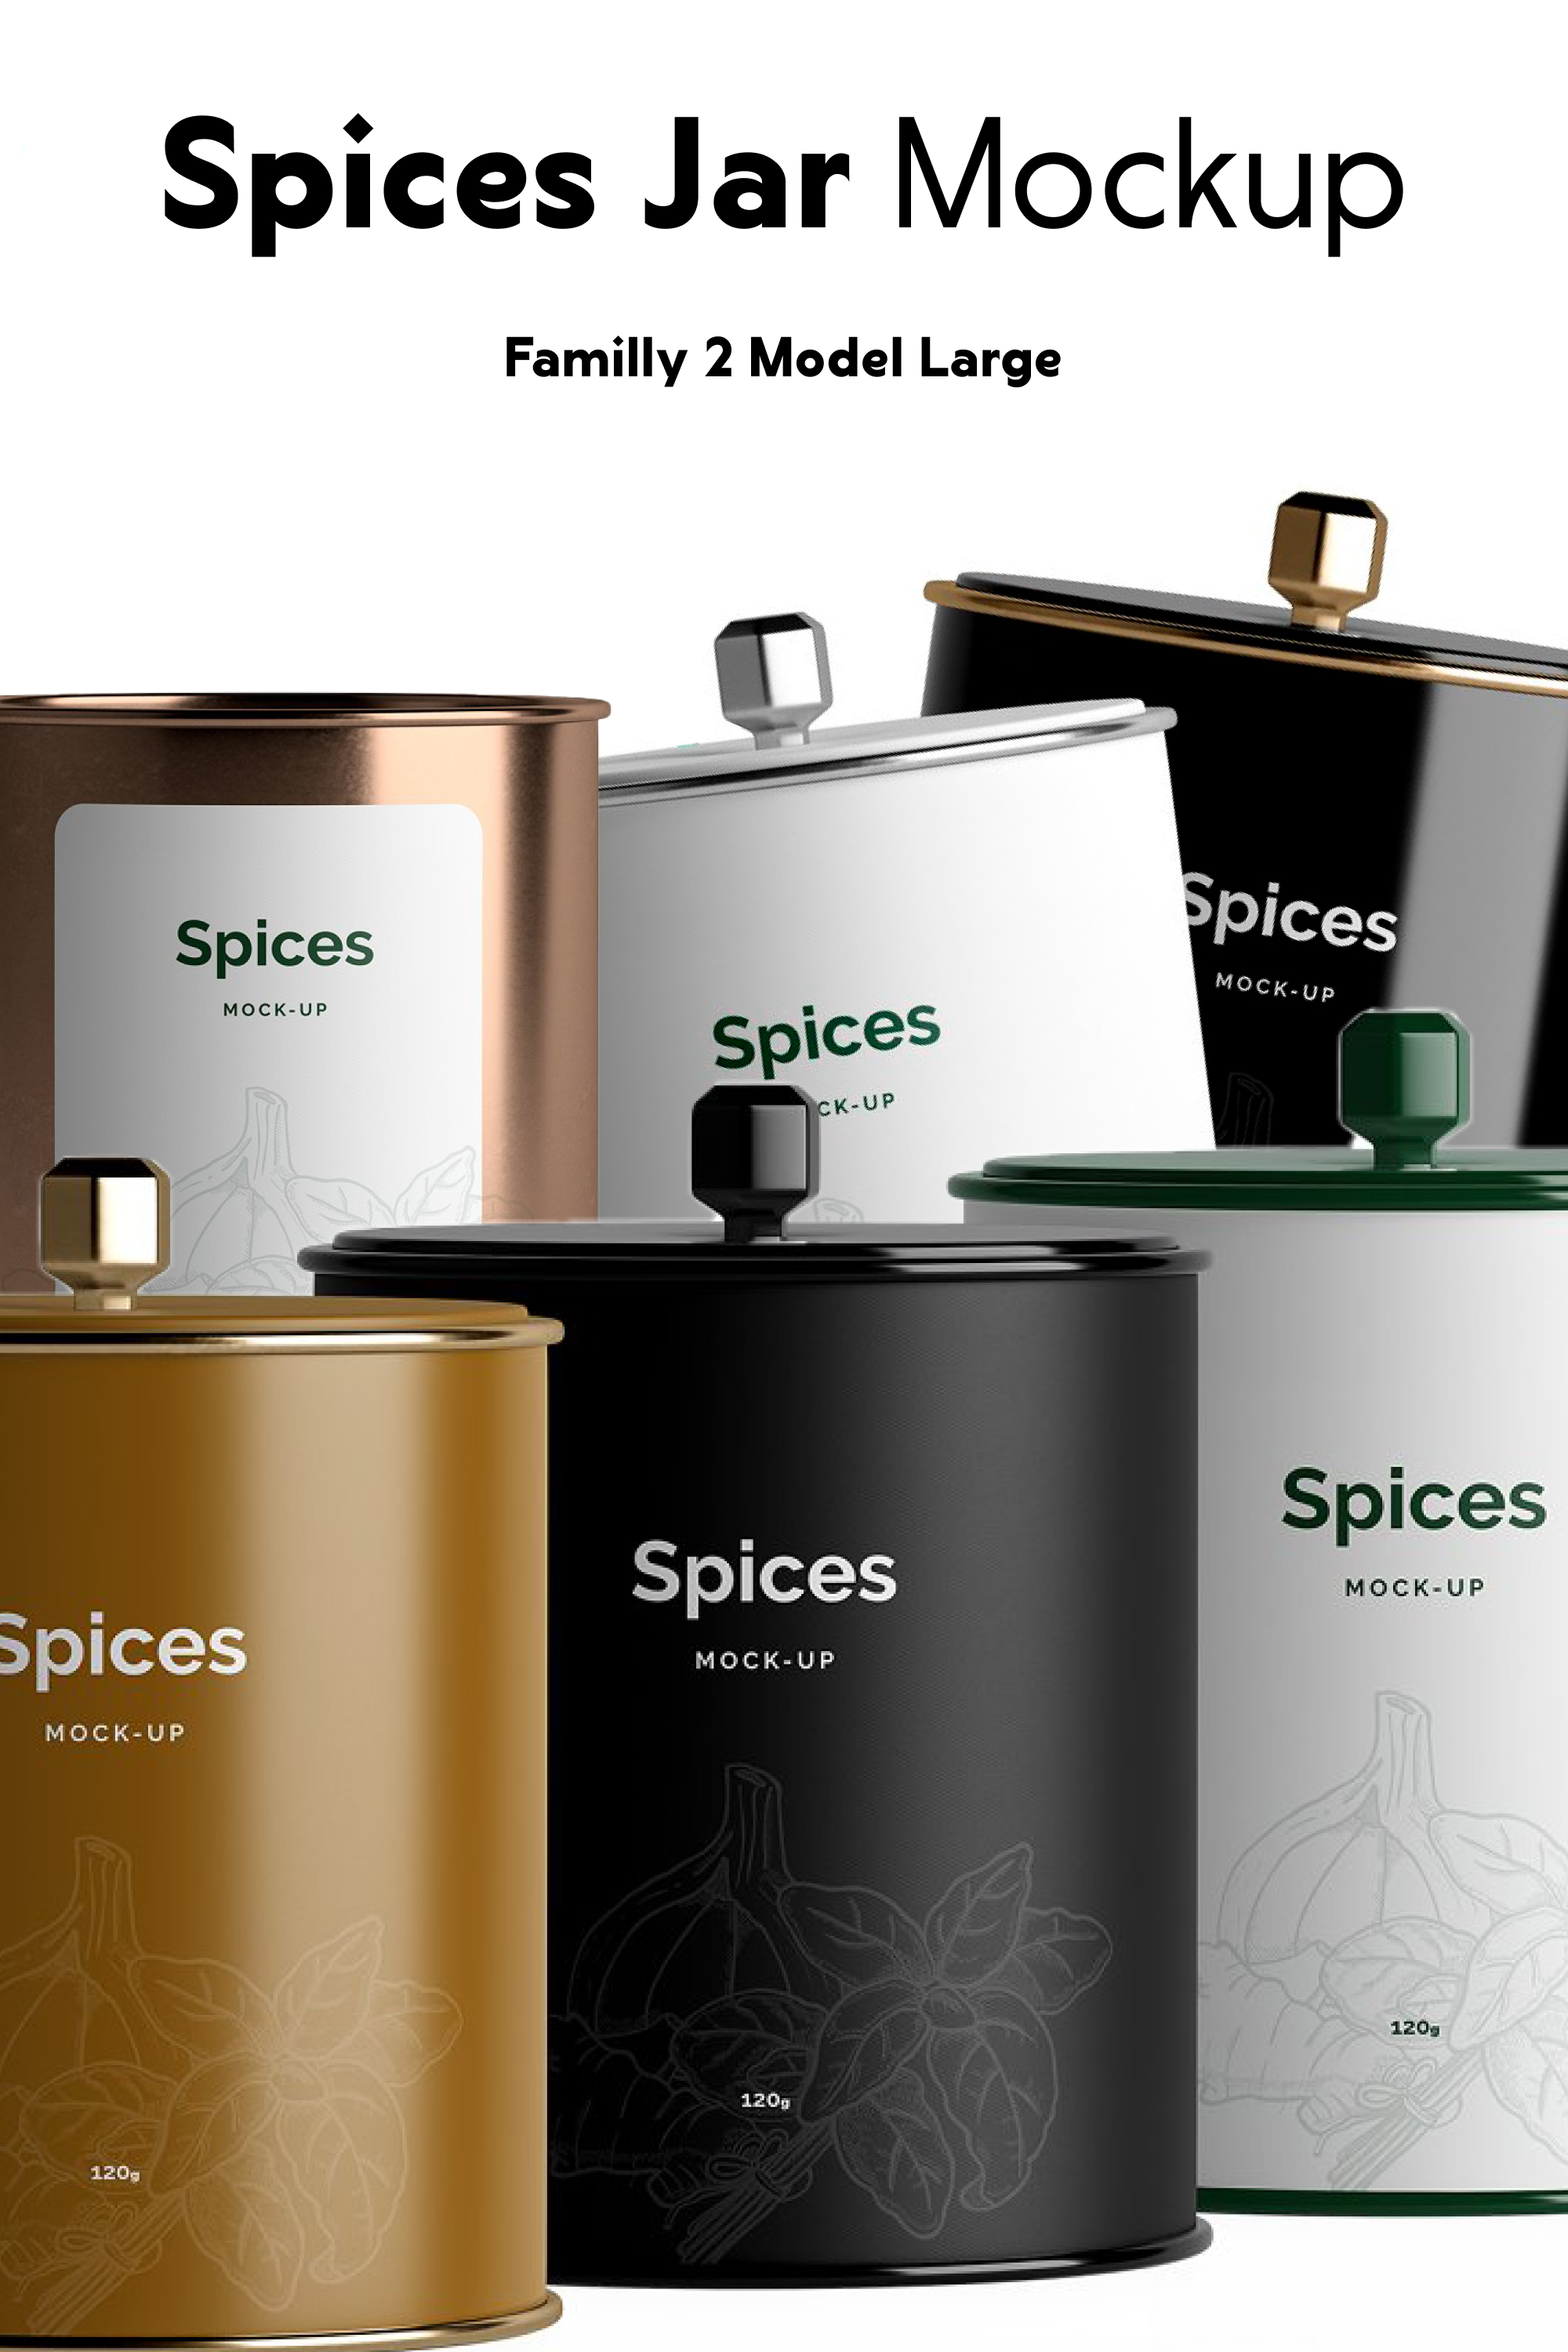 Spices mockup of pinterest.